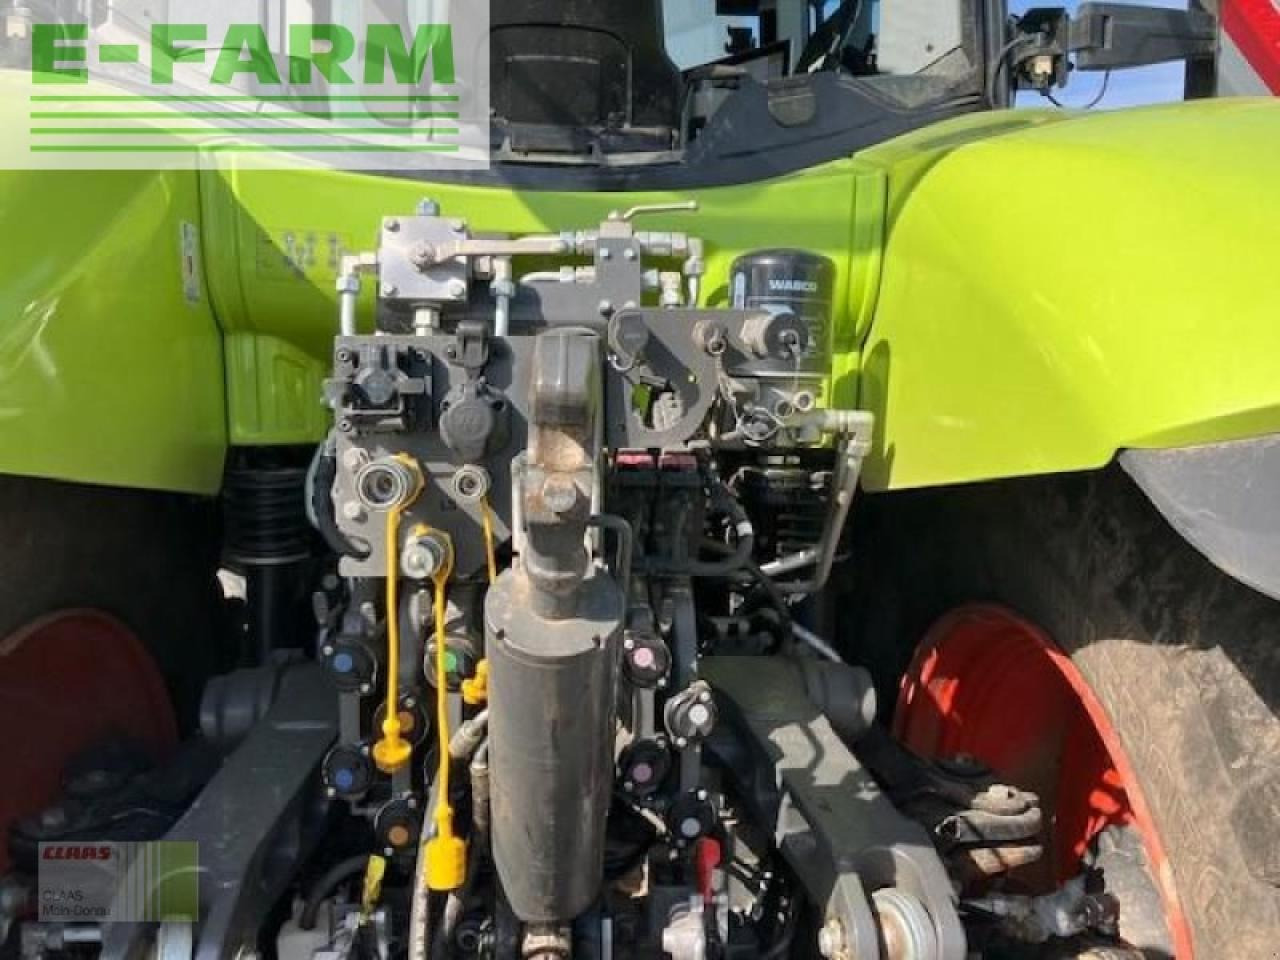 Tracteur agricole CLAAS axion 830 cmatic-stage v cebis